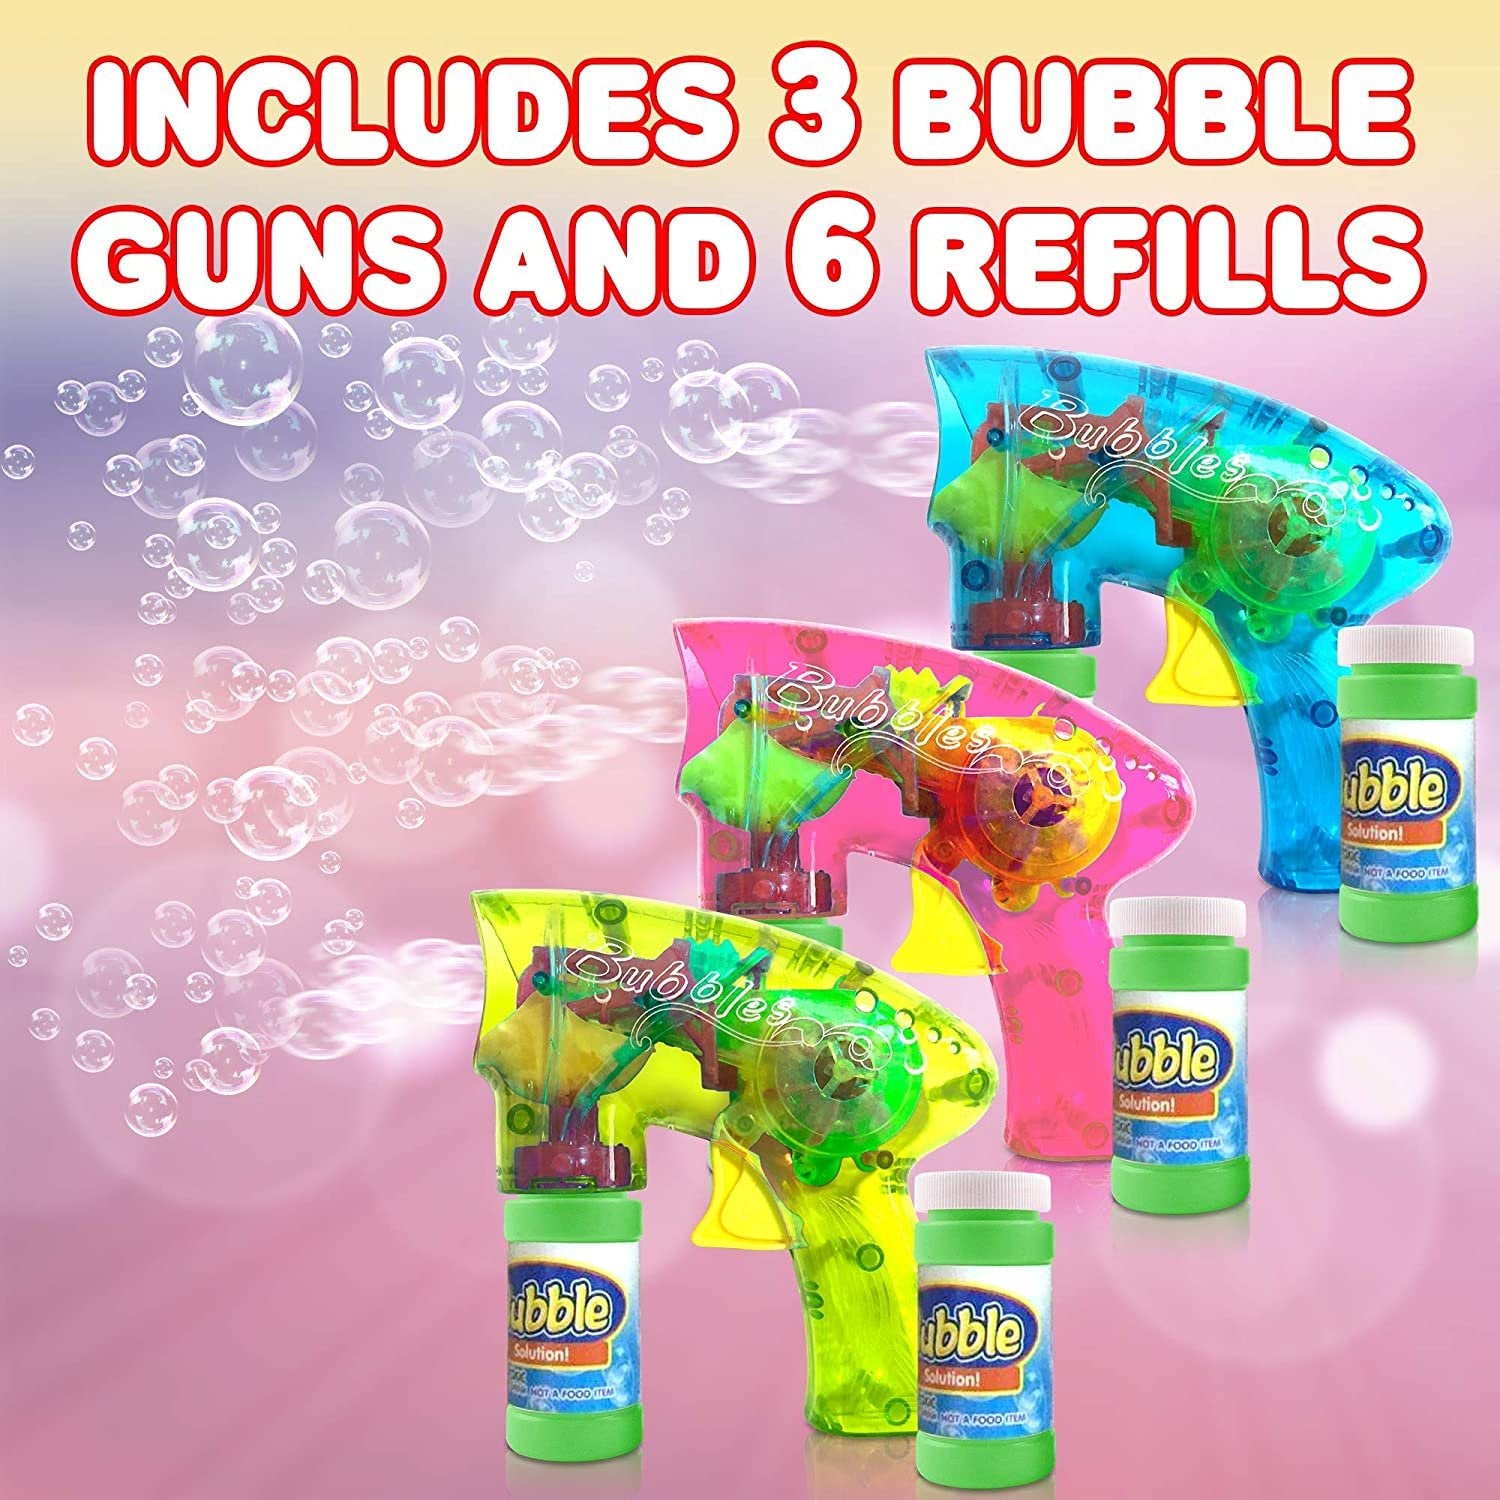 Friction Powered Light Up Bubble Blaster Gun Set - Set of 3 - Includes 3 LED Bubbles Guns and 6 Bottles of Bubble Fluid - No Batteries Needed - Outdoor, Indoor Fun - Gift Idea, Party